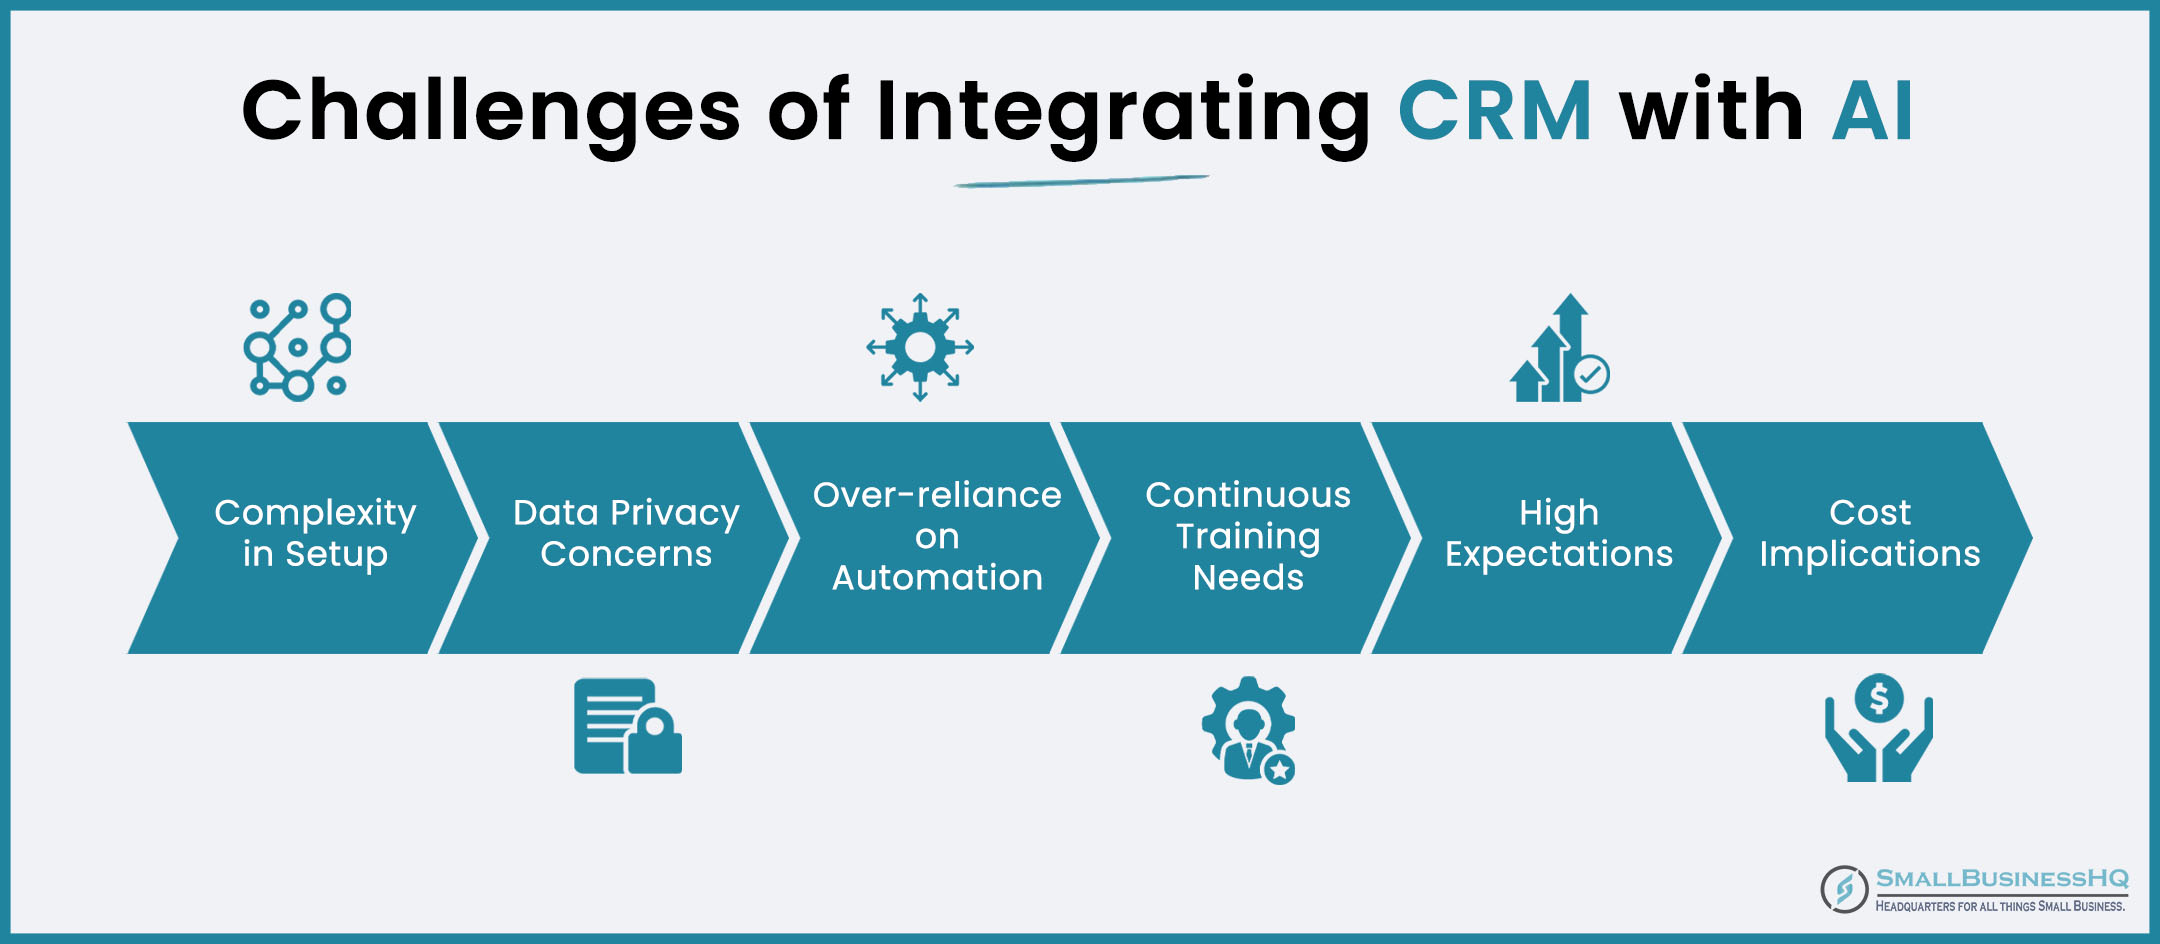 Challenges of Integrating CRM with AI